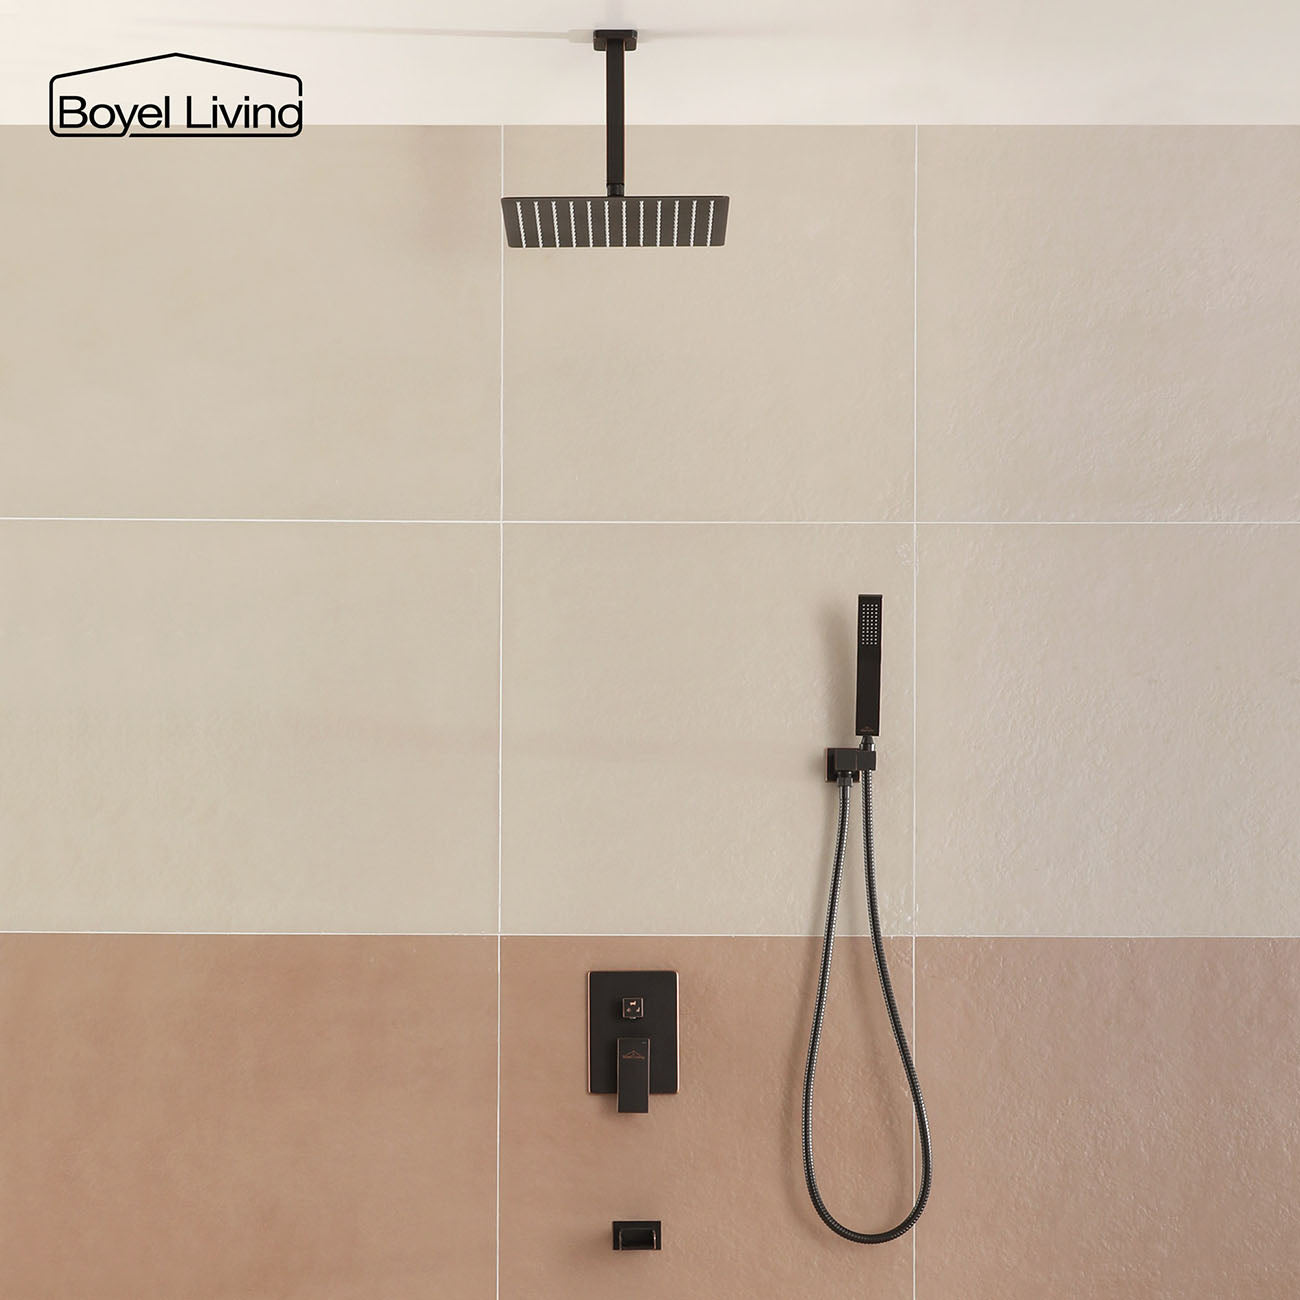 Boyel Living Three Function Shower System in Oil Rubbed Bronze